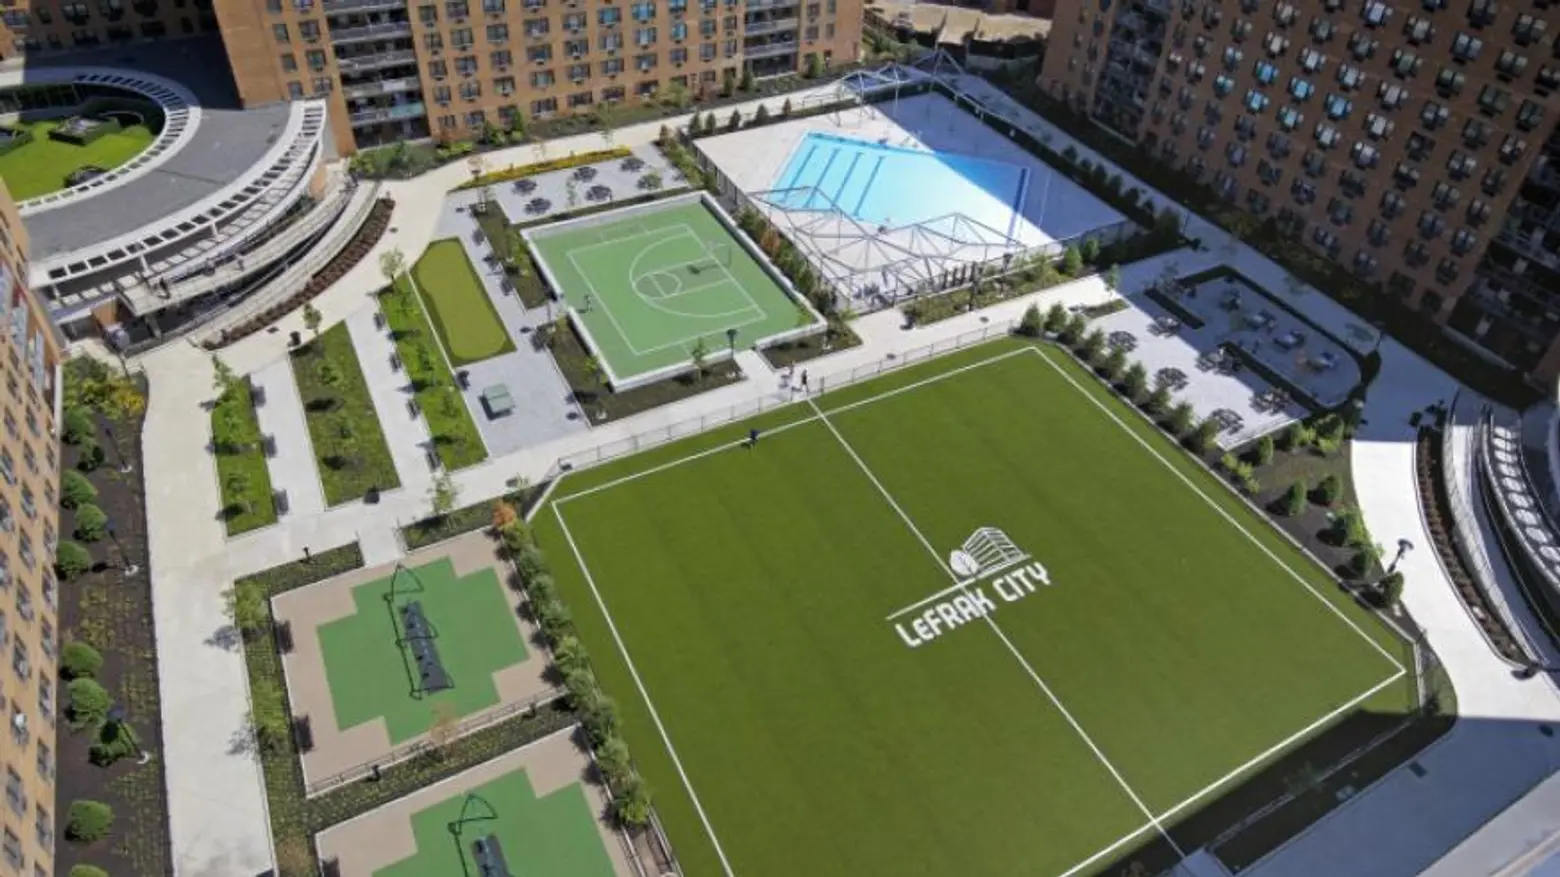 LeFrak City’s $70M renovation brings a spectacular amenity space to Queens